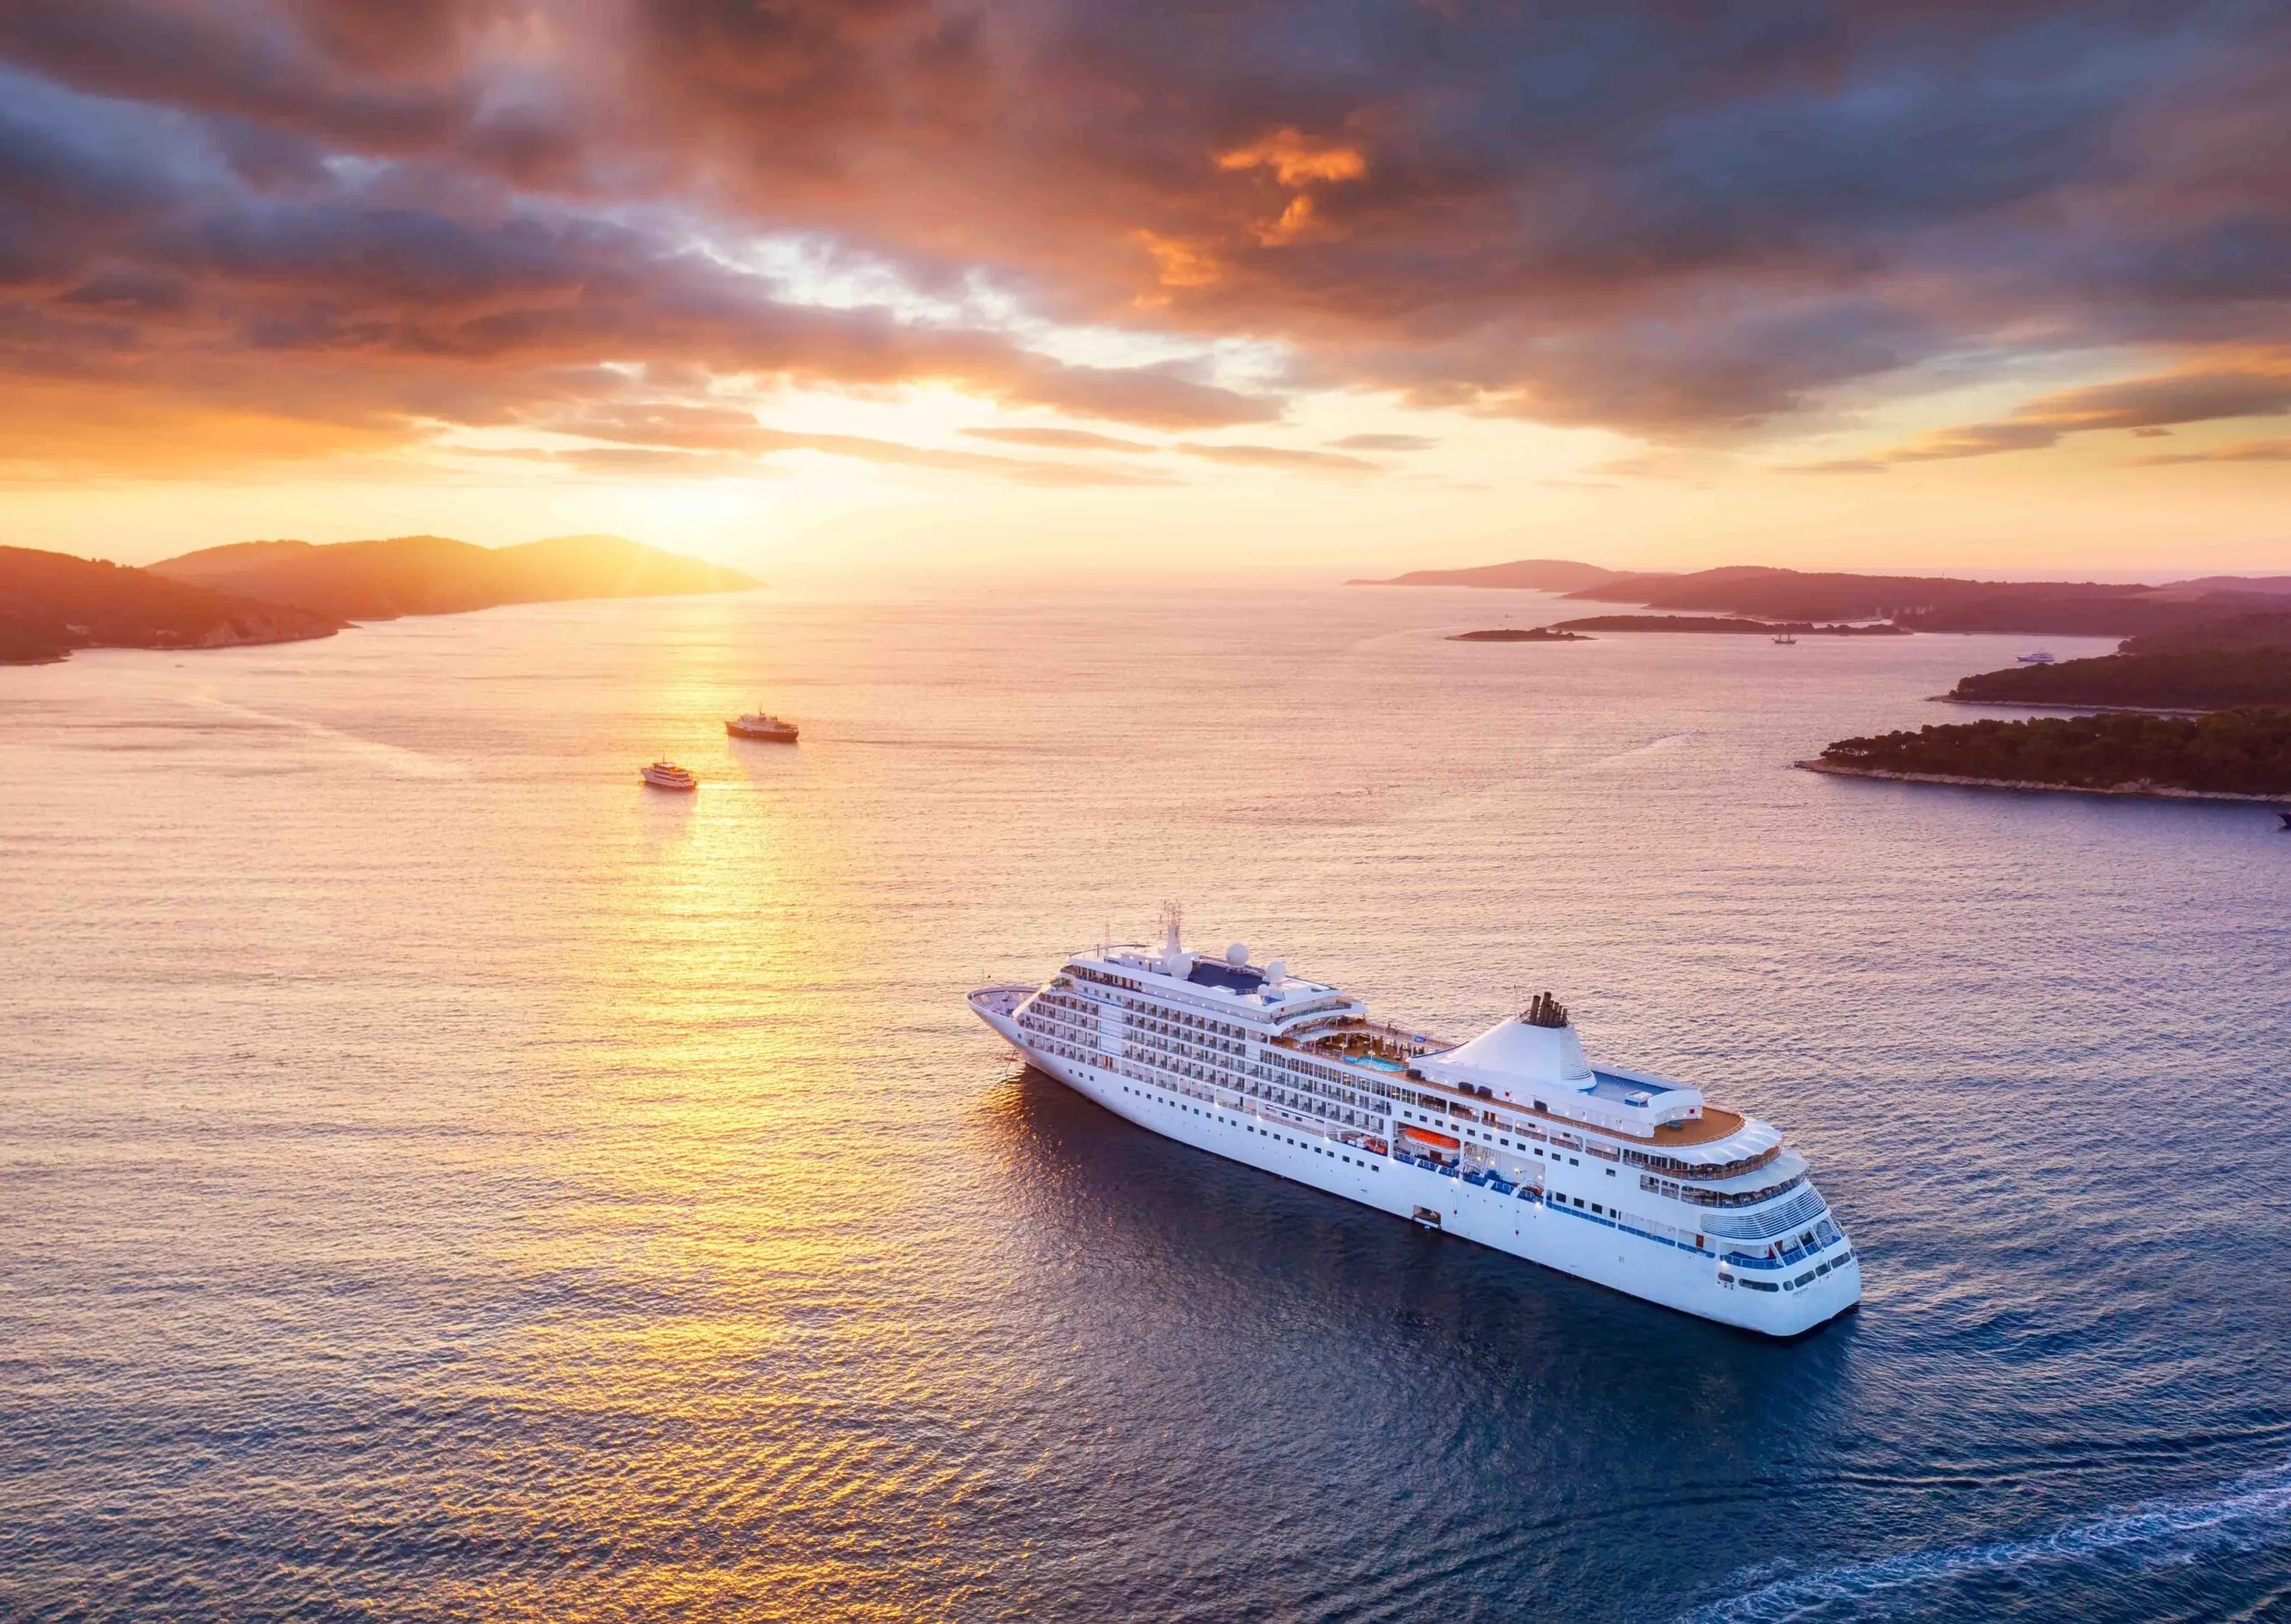 Licensed File #: 276360308 Find Similar Dimensions 5348 x 3791px File Type JPEG Category Landscapes License Type Standard or Extended Croatia. Aerial view at the cruise ship during sunset. Adventure and travel. Landscape with cruise liner on Adriatic sea. Luxury cruise. Travel - image